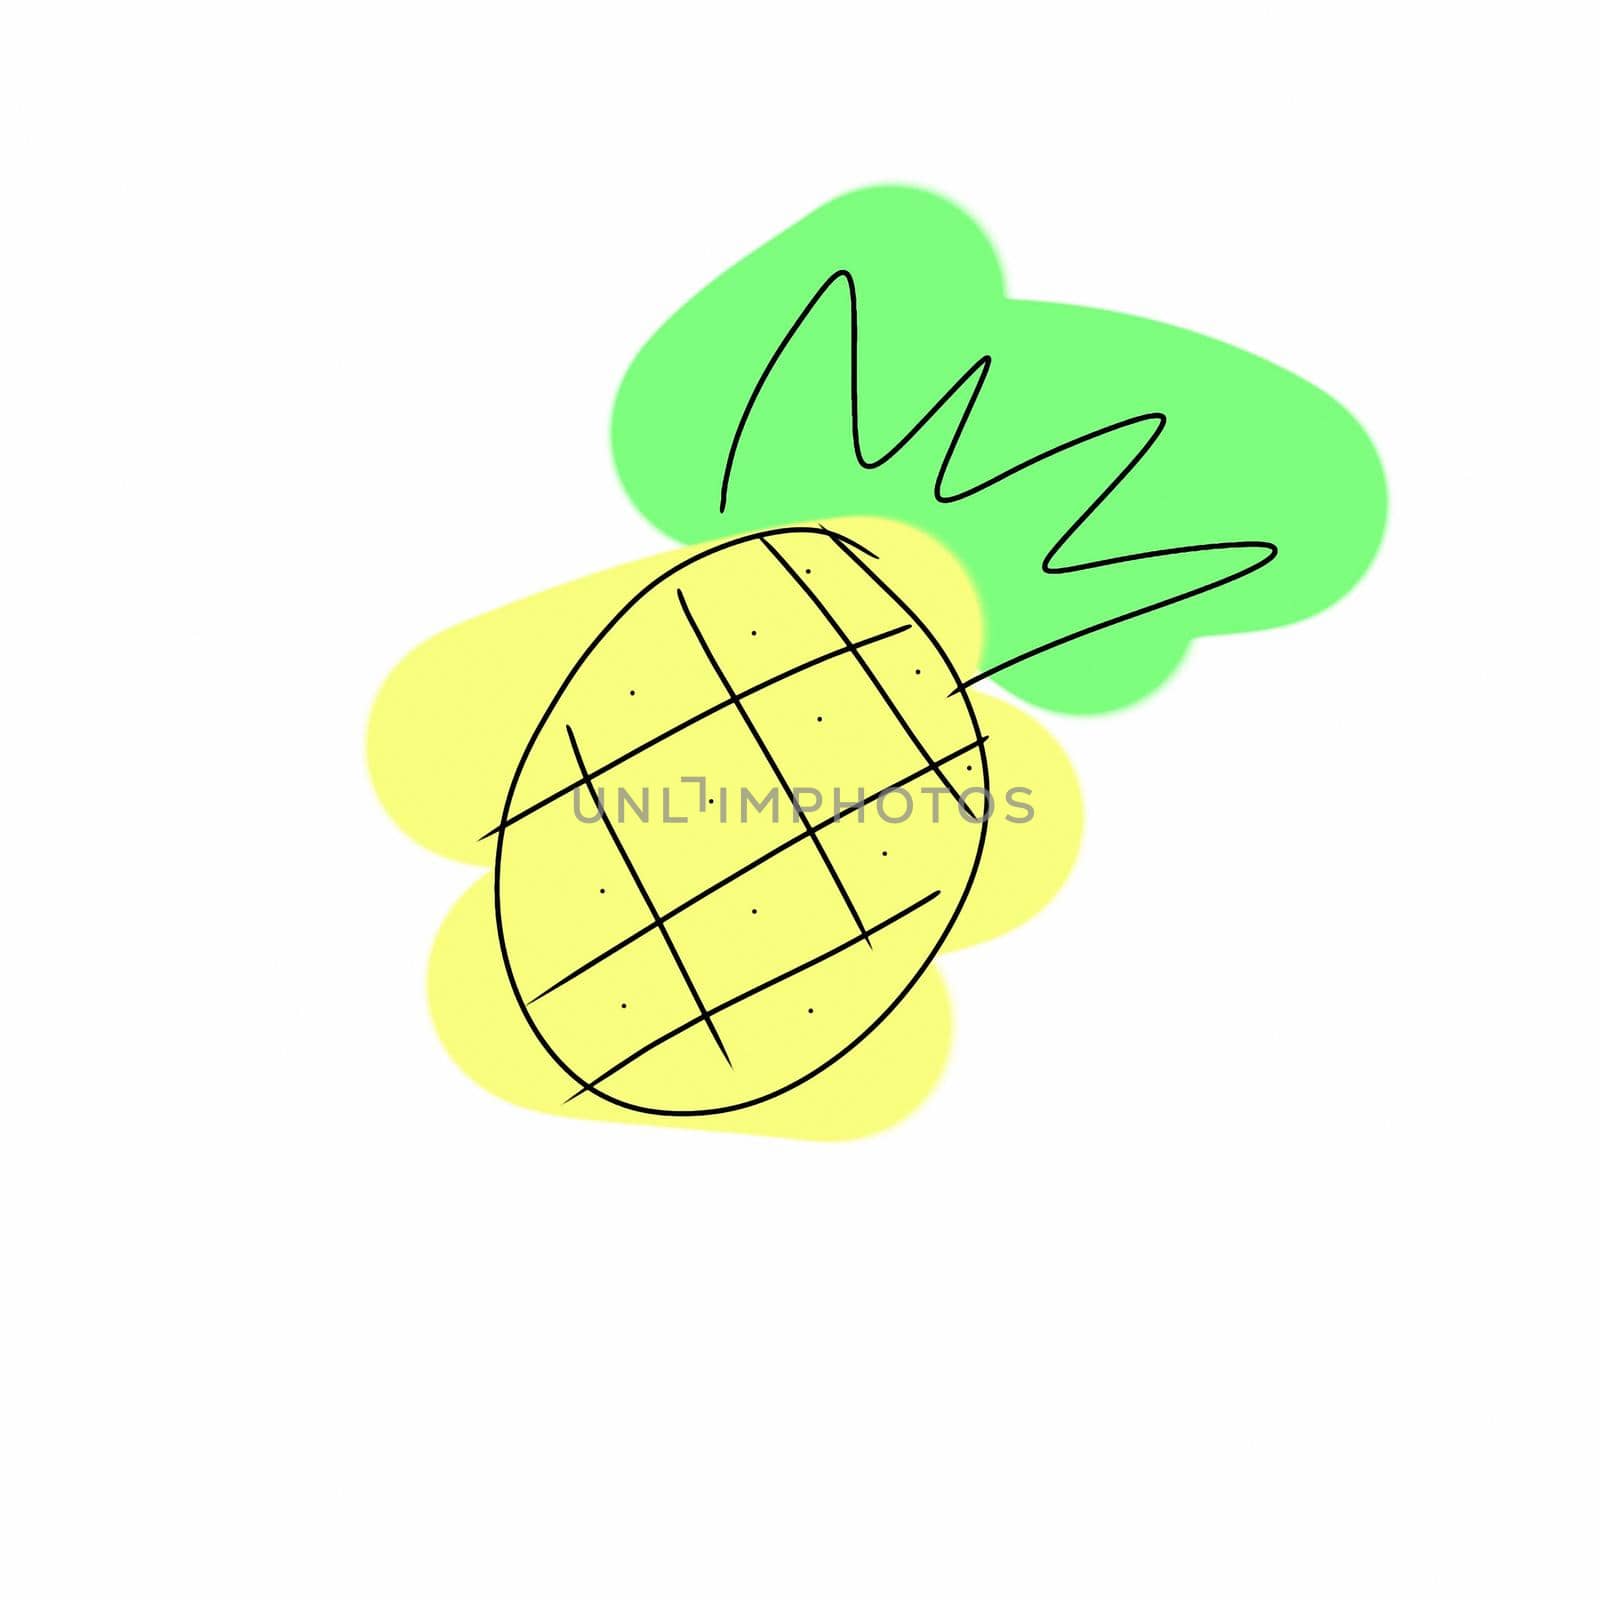 Pineapple. Illustration of pineapple fruit with isolated cartoon style on white by profmon